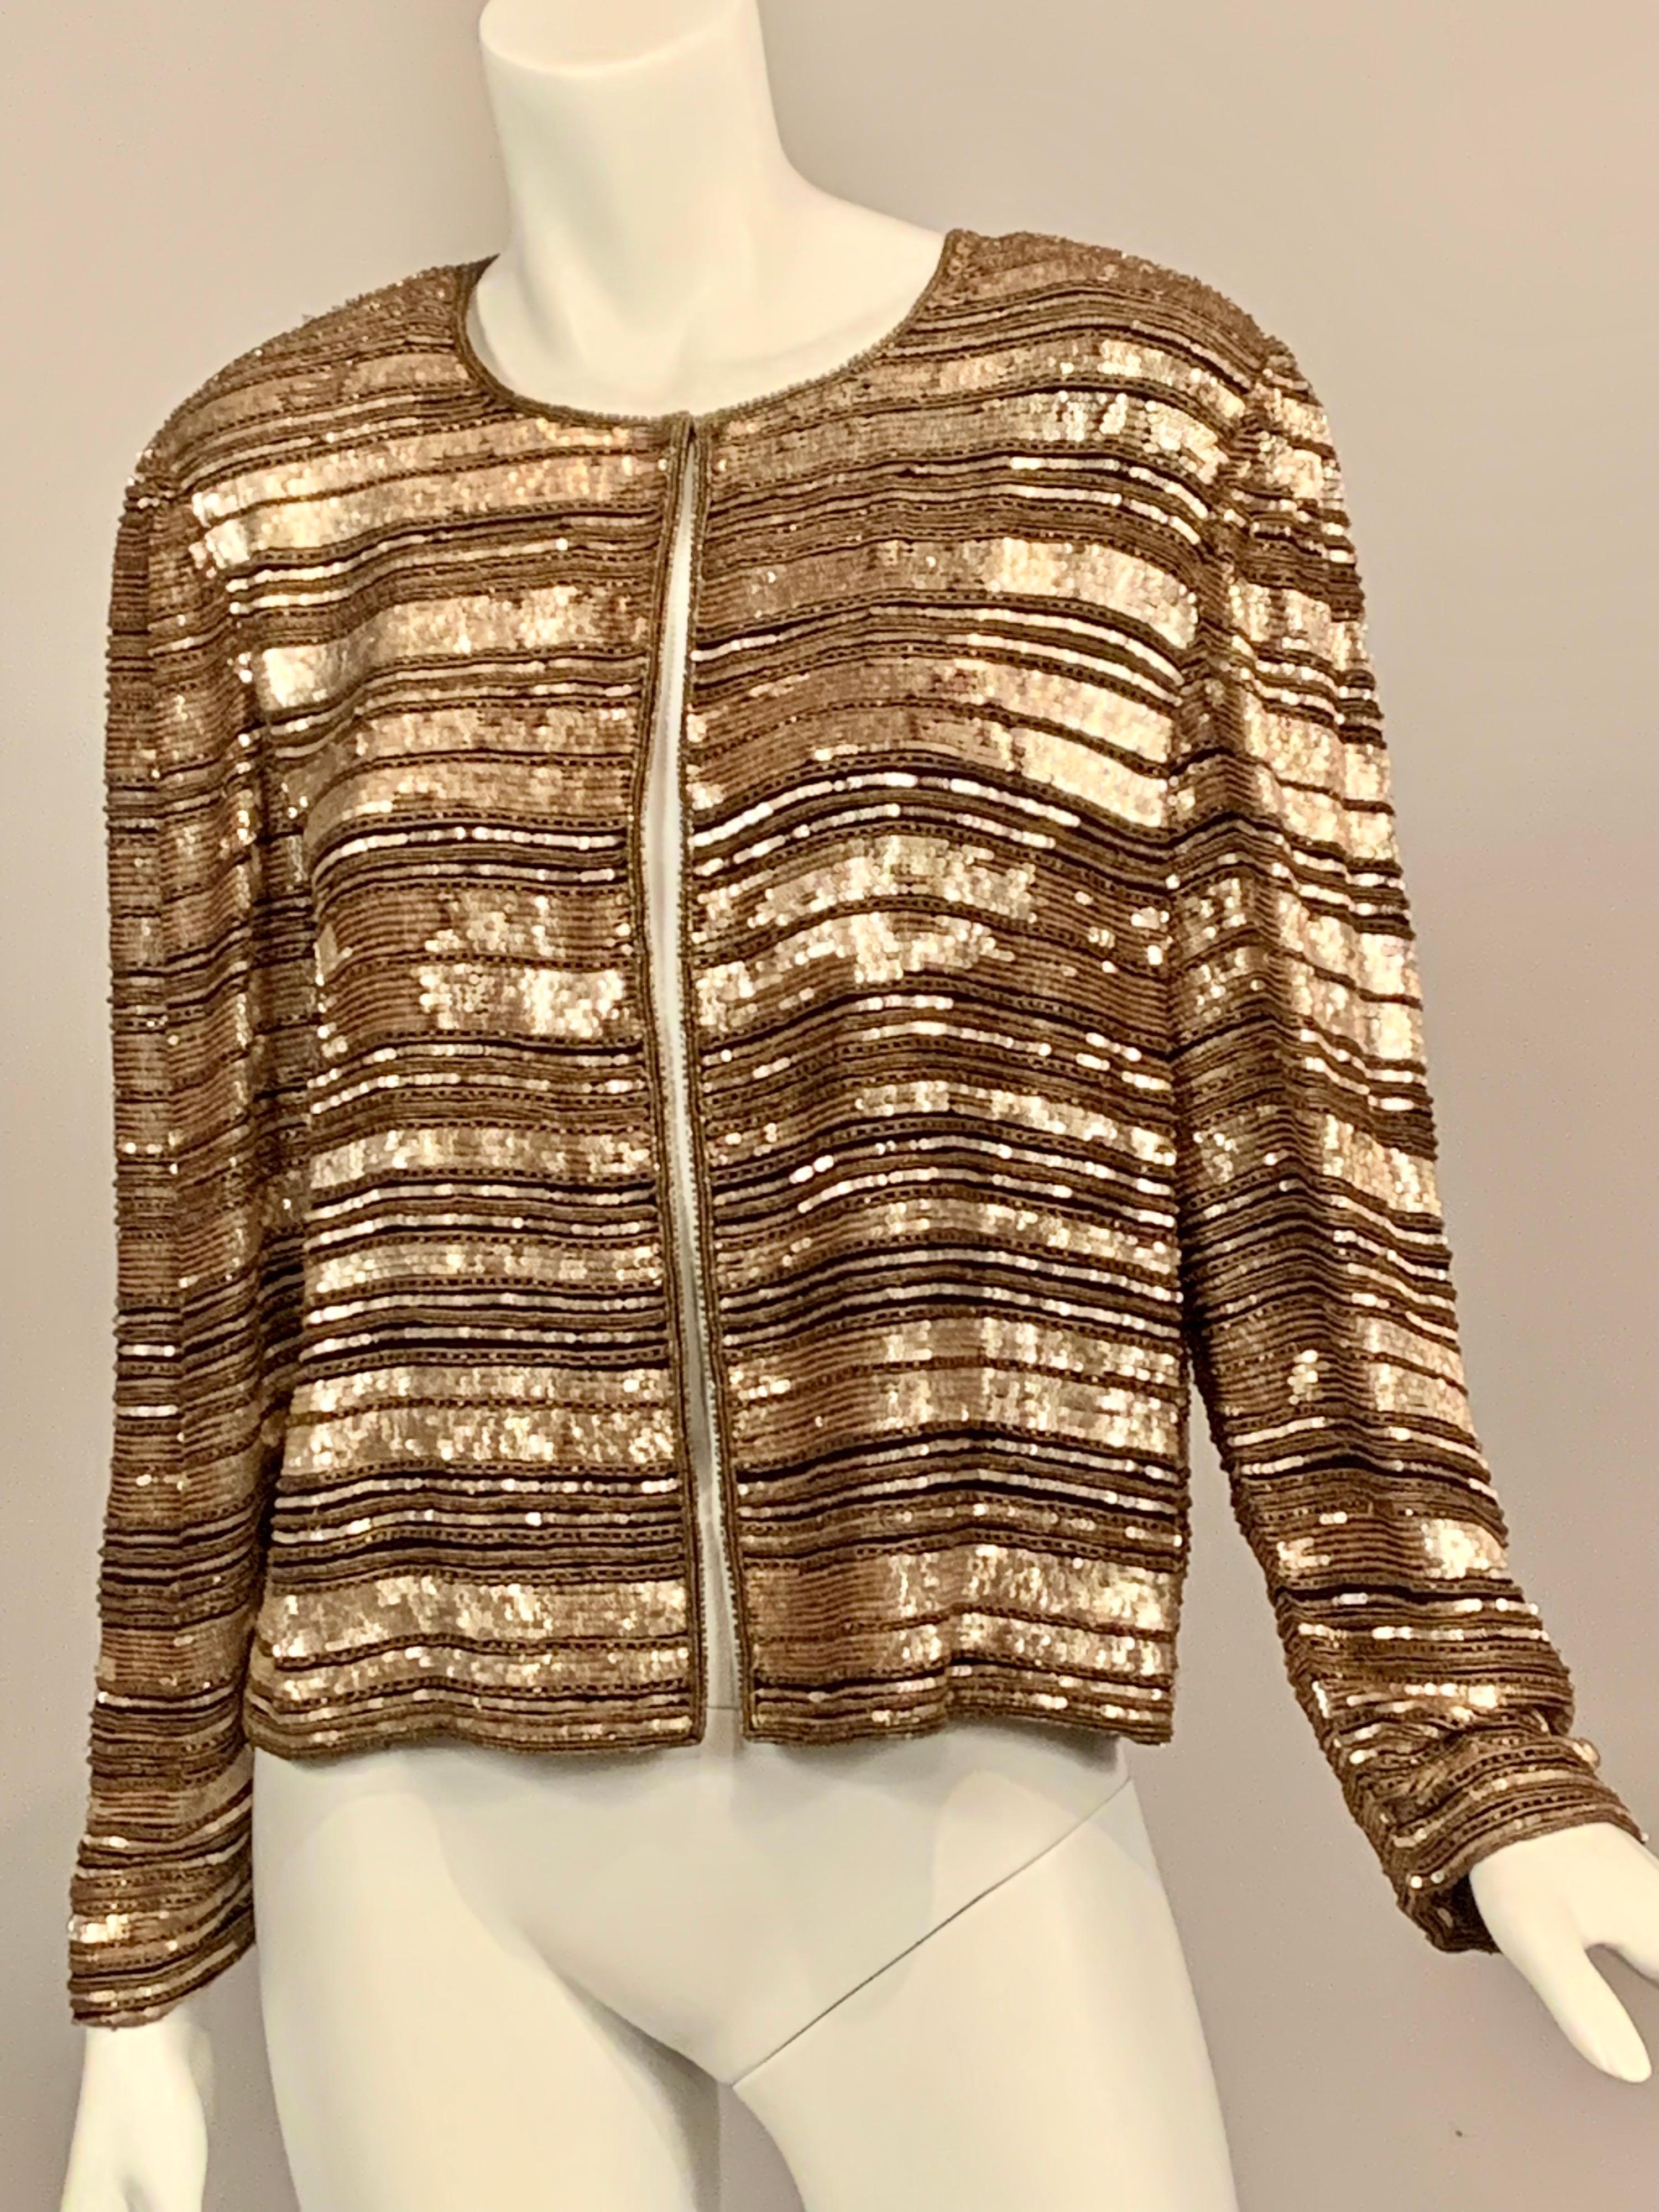 Reminiscent of many jackets designed by Coco Chanel, this jacket is a classic cardigan style with a single hook and eye at the neckline for closure.  It is all about the embellishment!  All of the sequins, bugle beads and caviar beads  are very,